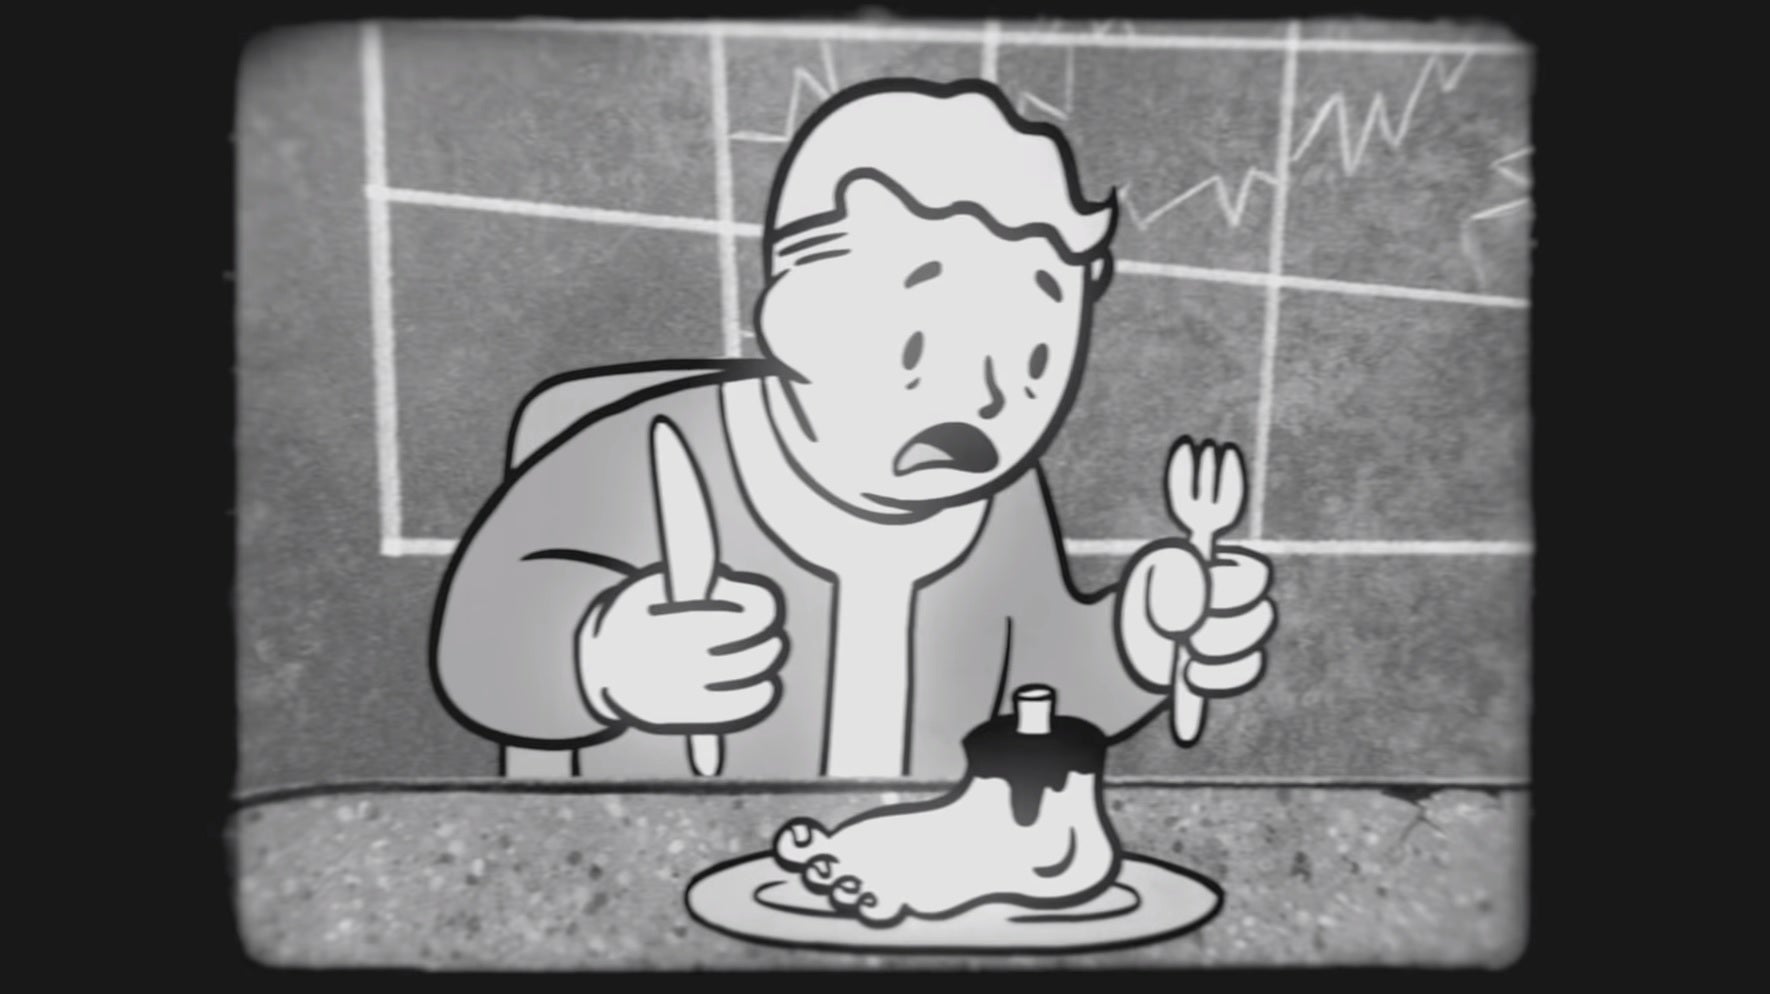 Fallout - The Vault Boy sits at a table with knife and fork, looking appalled at a severed foot on a plate in front of him.